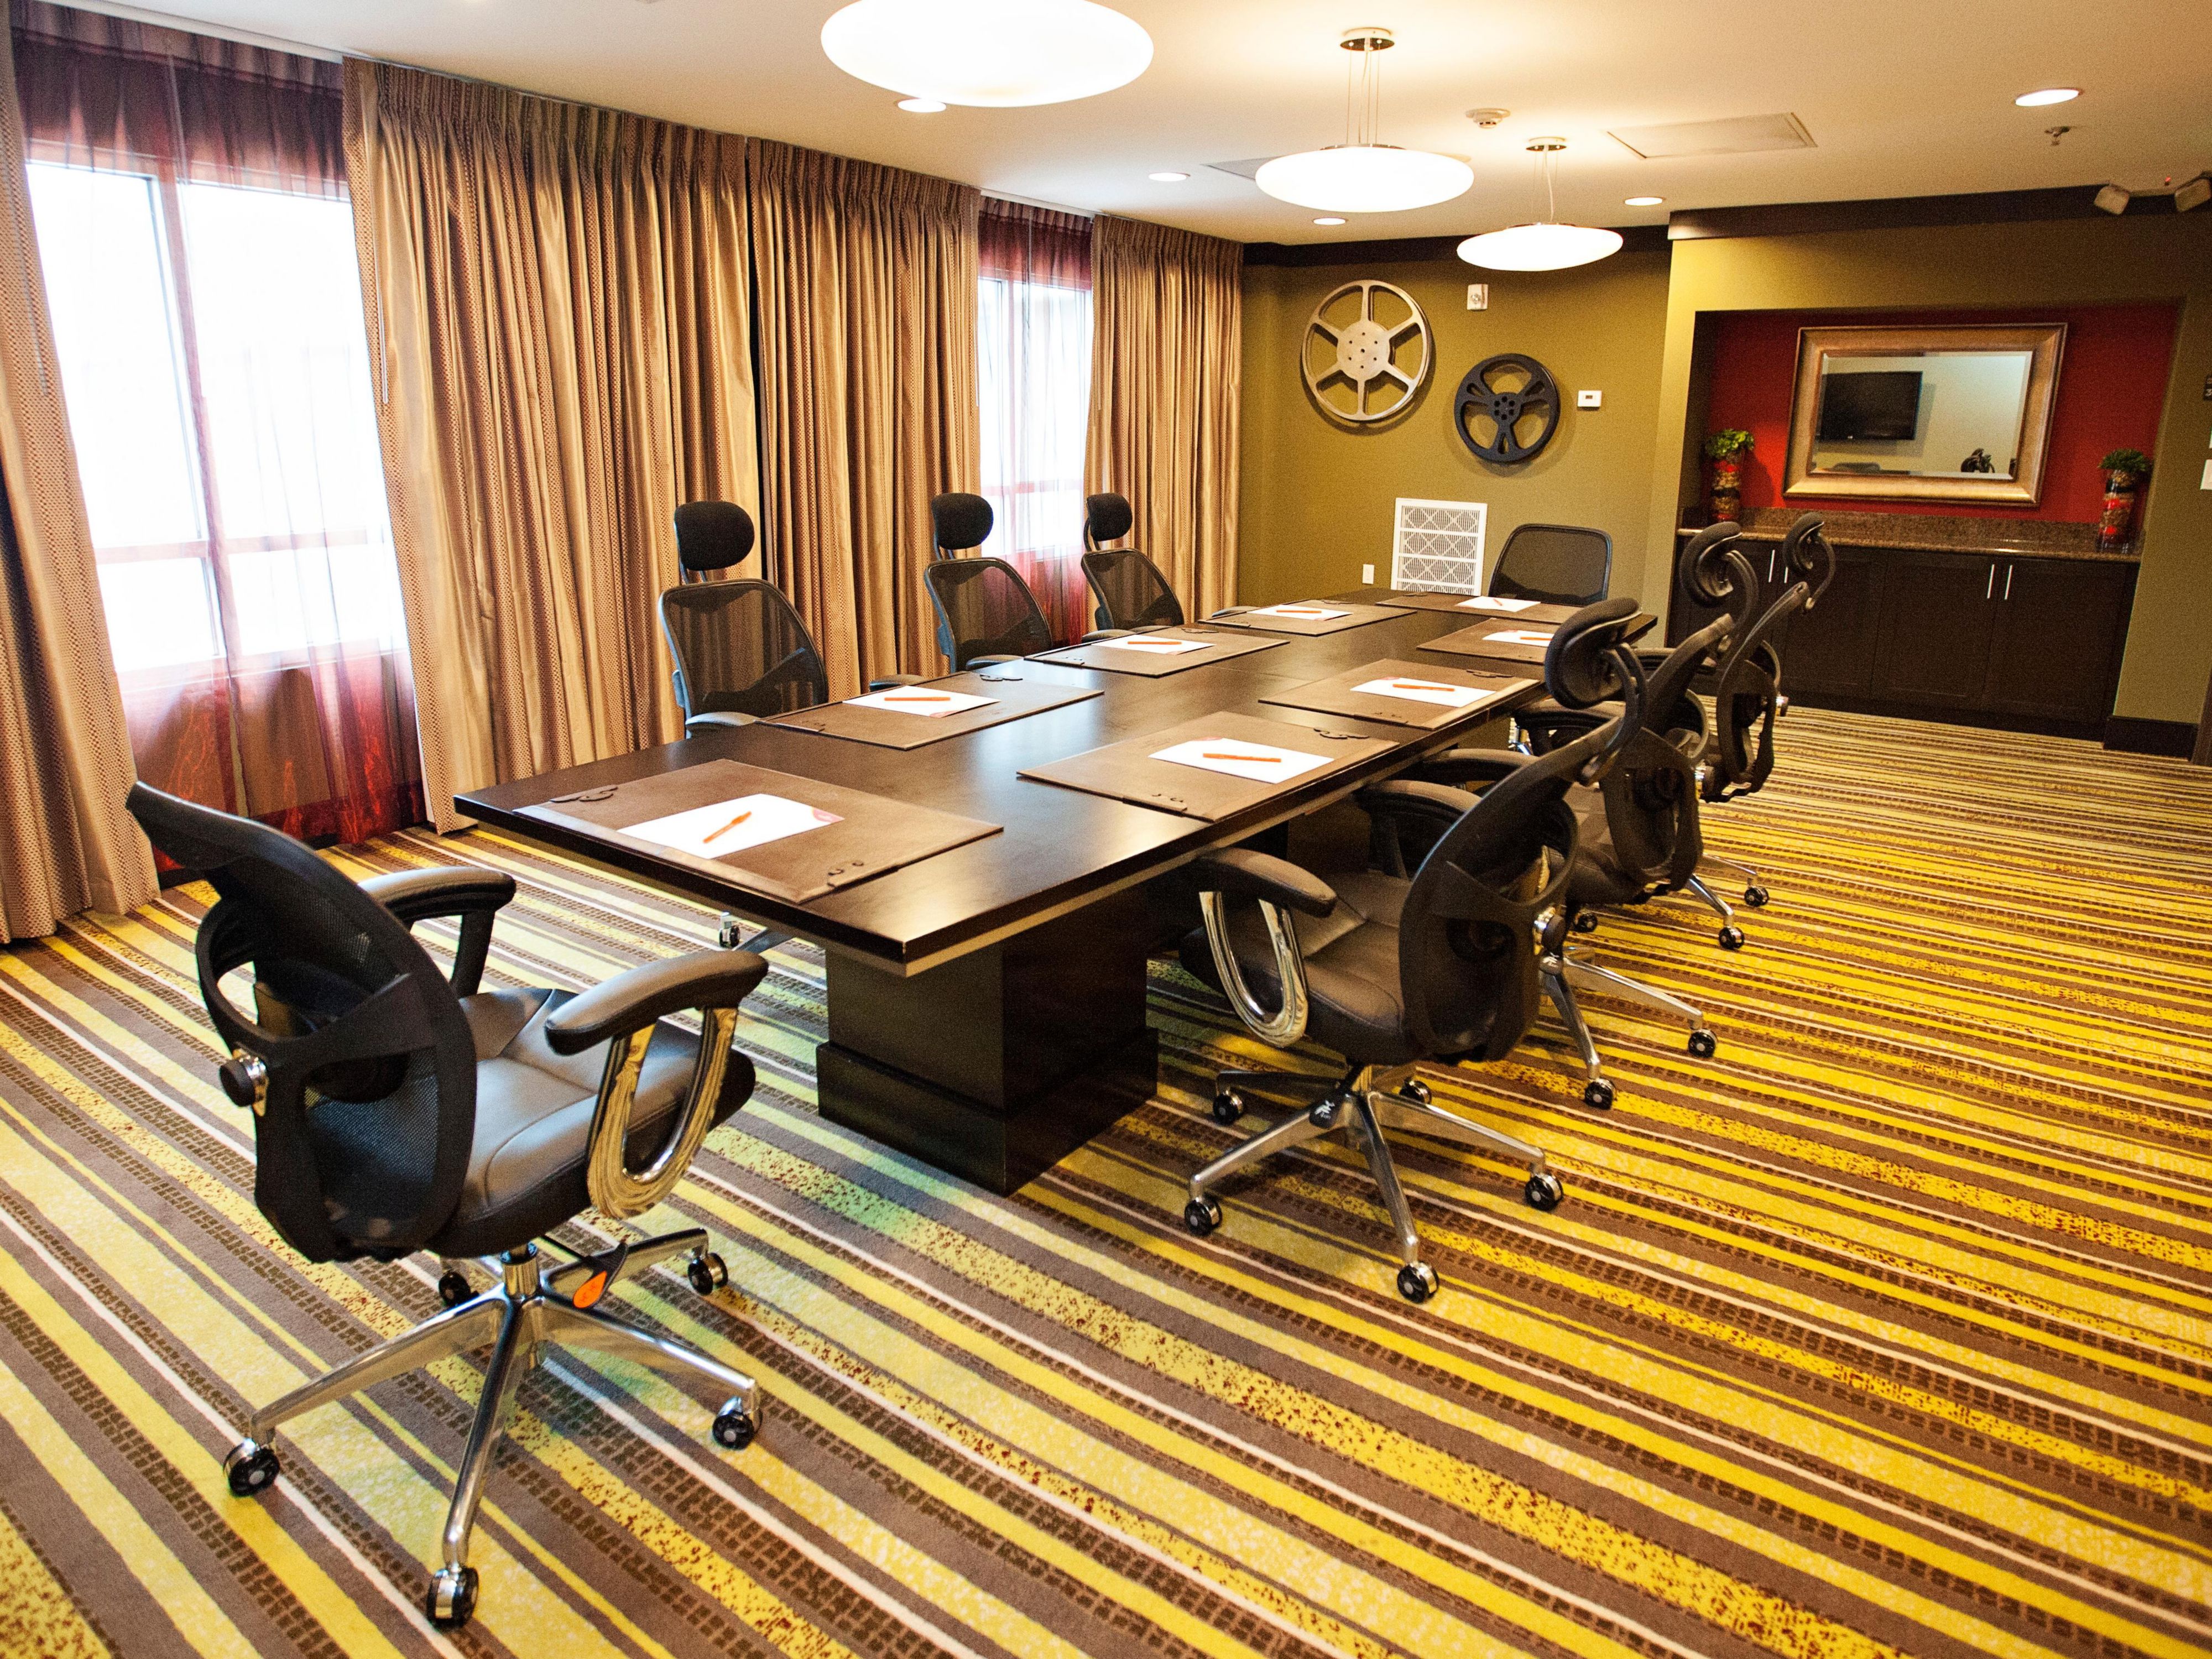 The Crowne Plaza Houston Galleria has 12,000 square feet of meeting room space.  From small meetings to large gatherings, we have the space and staff members to take care of all the details.  